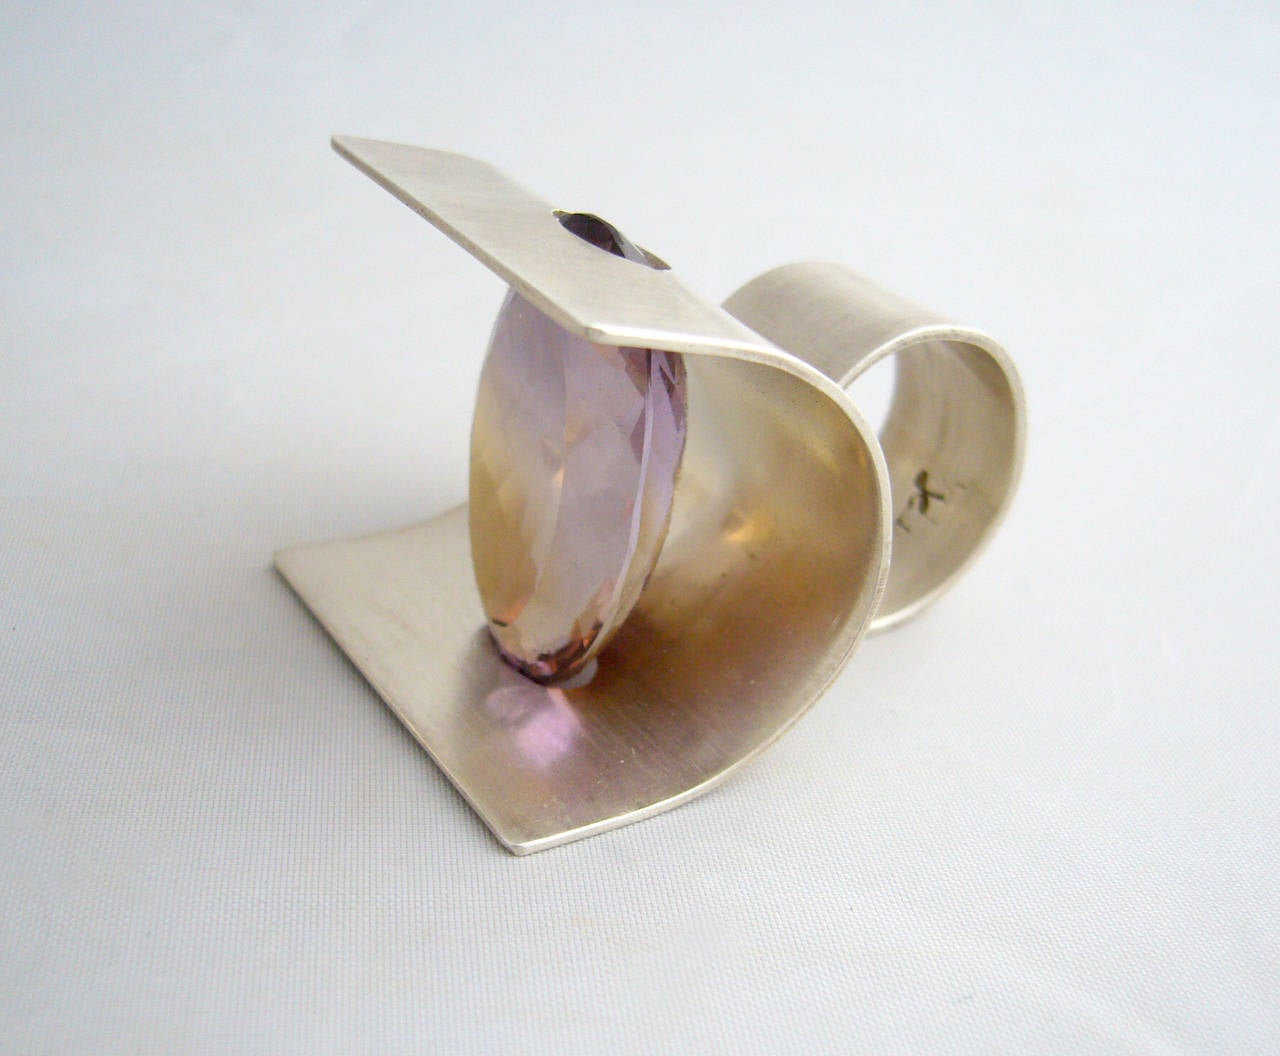 A faceted ametrine tension set within a curved piece of sterling silver, created by jeweler Heidi Abrahamson of Phoenix, Arizona.  Ametrine is a cross between an amethyst and citrine, this one being a beautiful example.  Ring has a very large